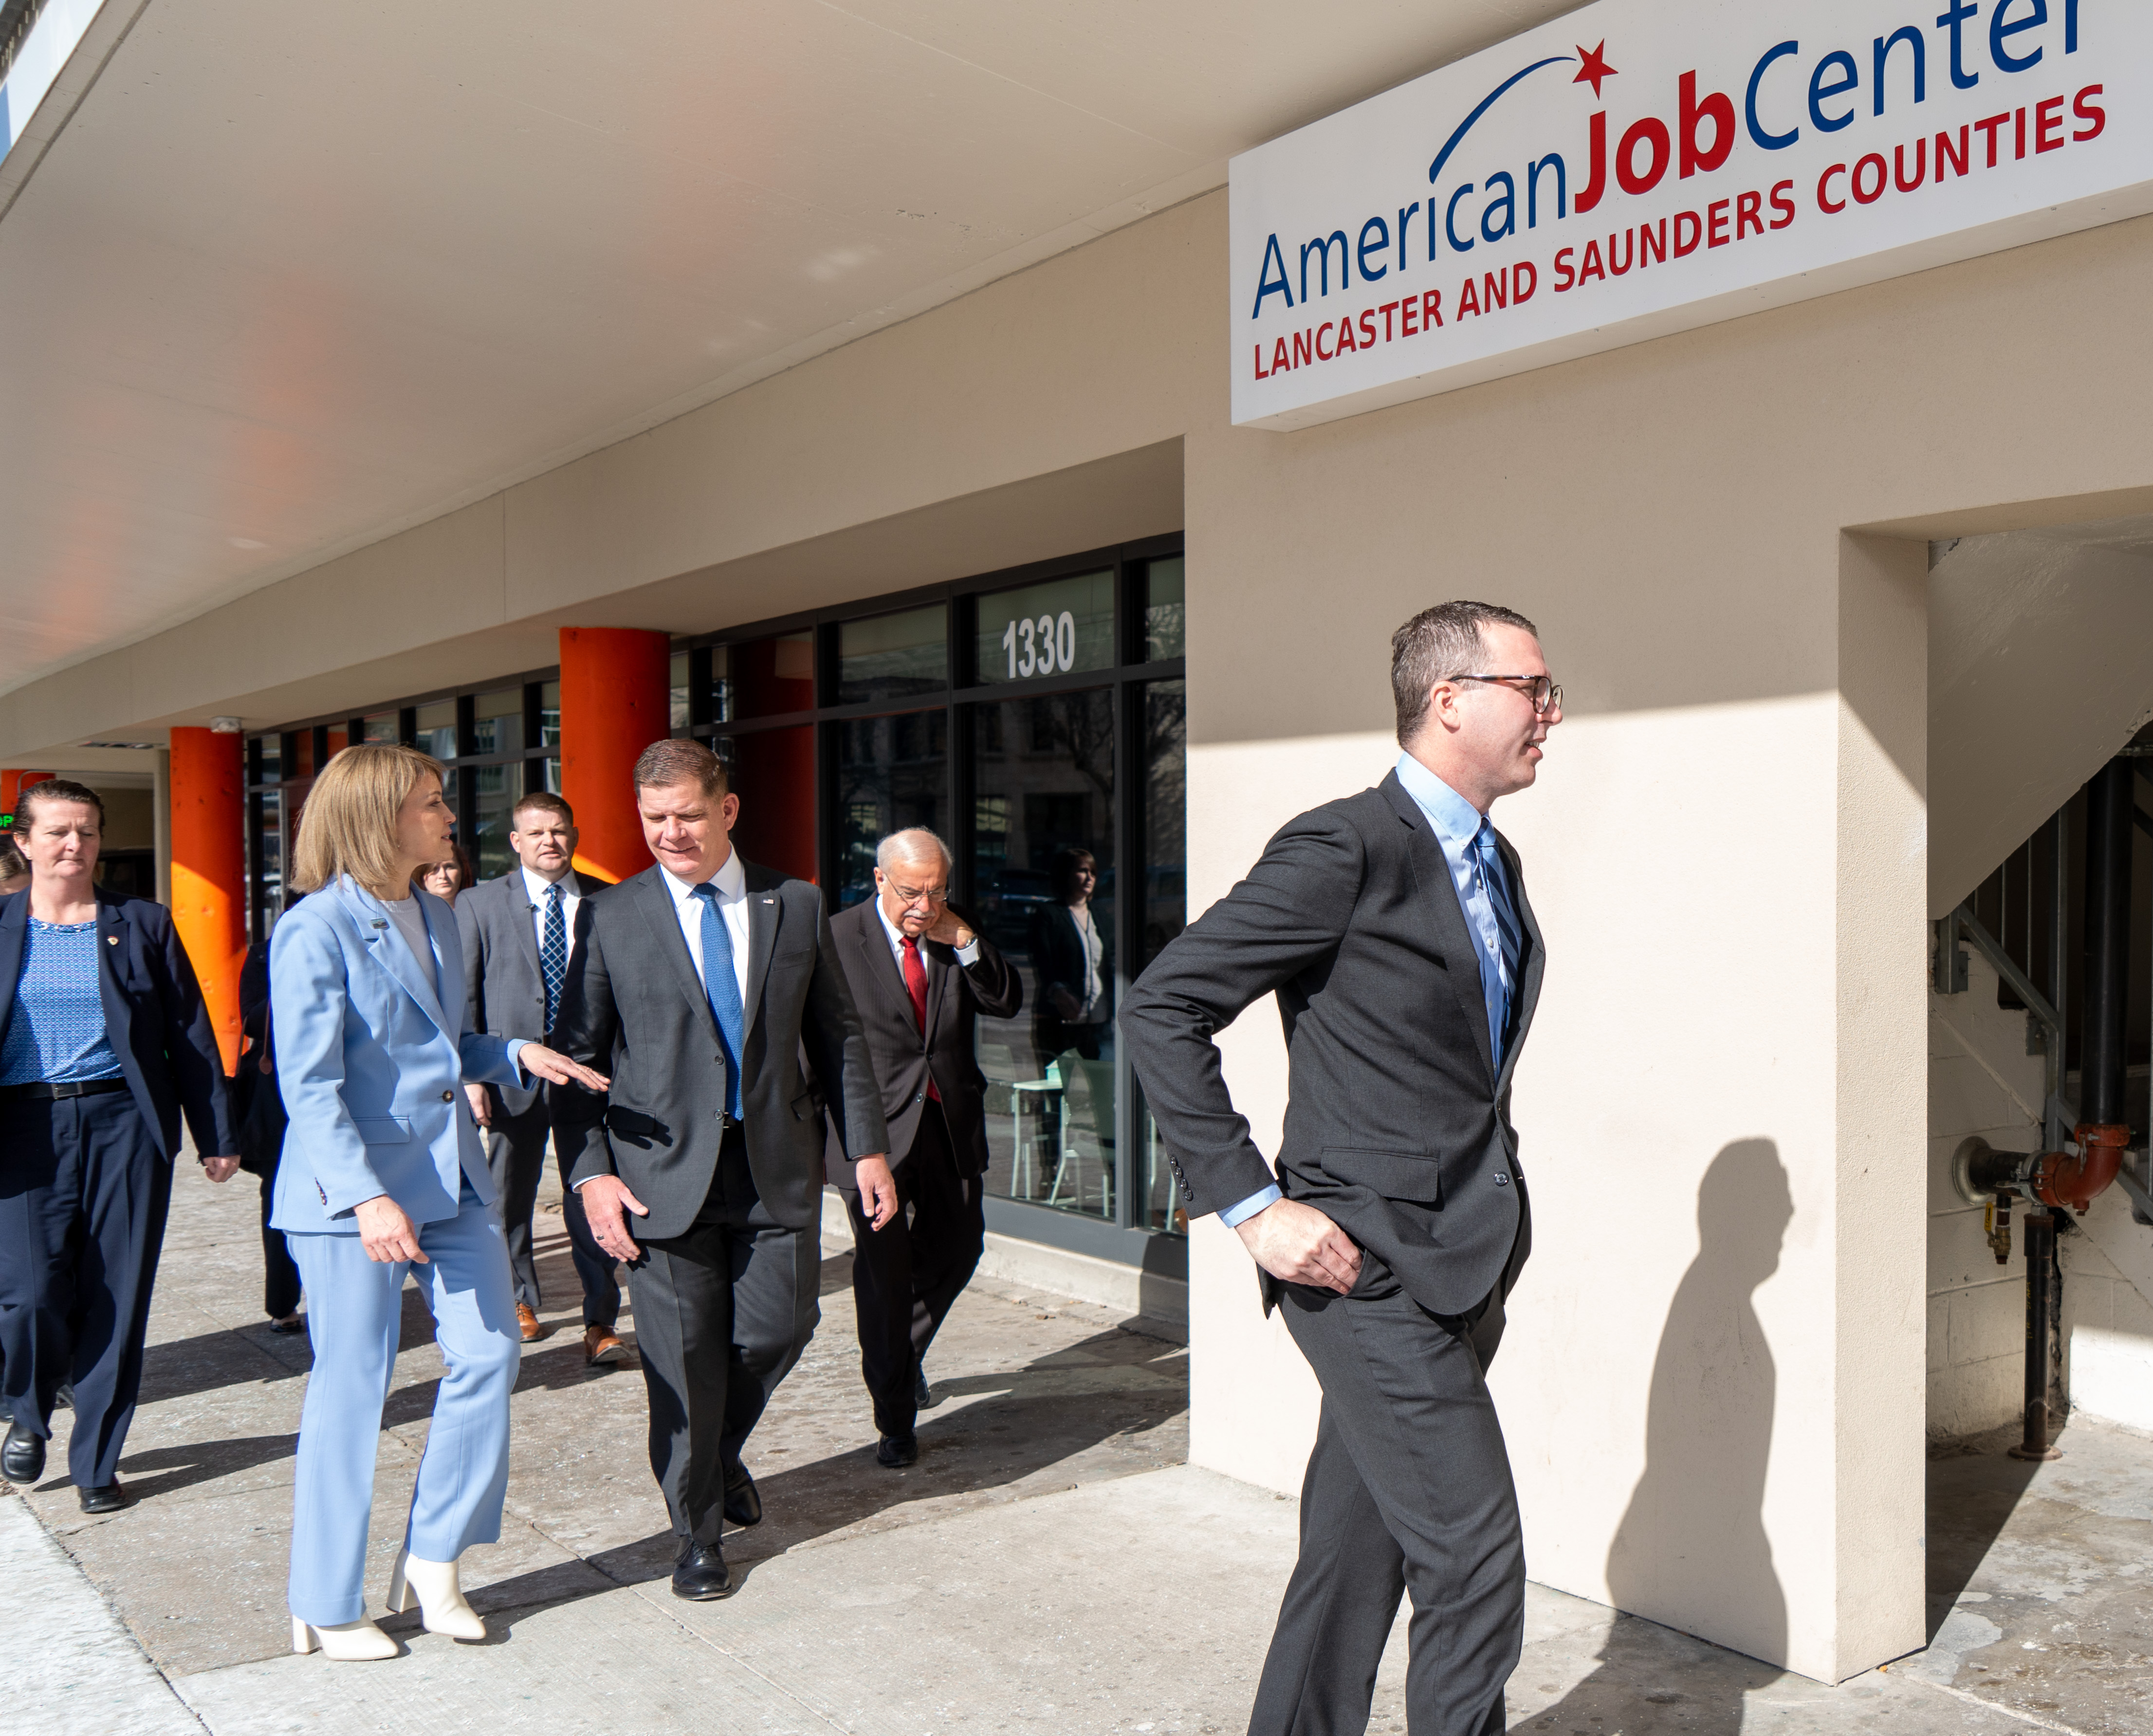 20230223_News-Conference-AJC-Grand-Opening_27-1.jpg